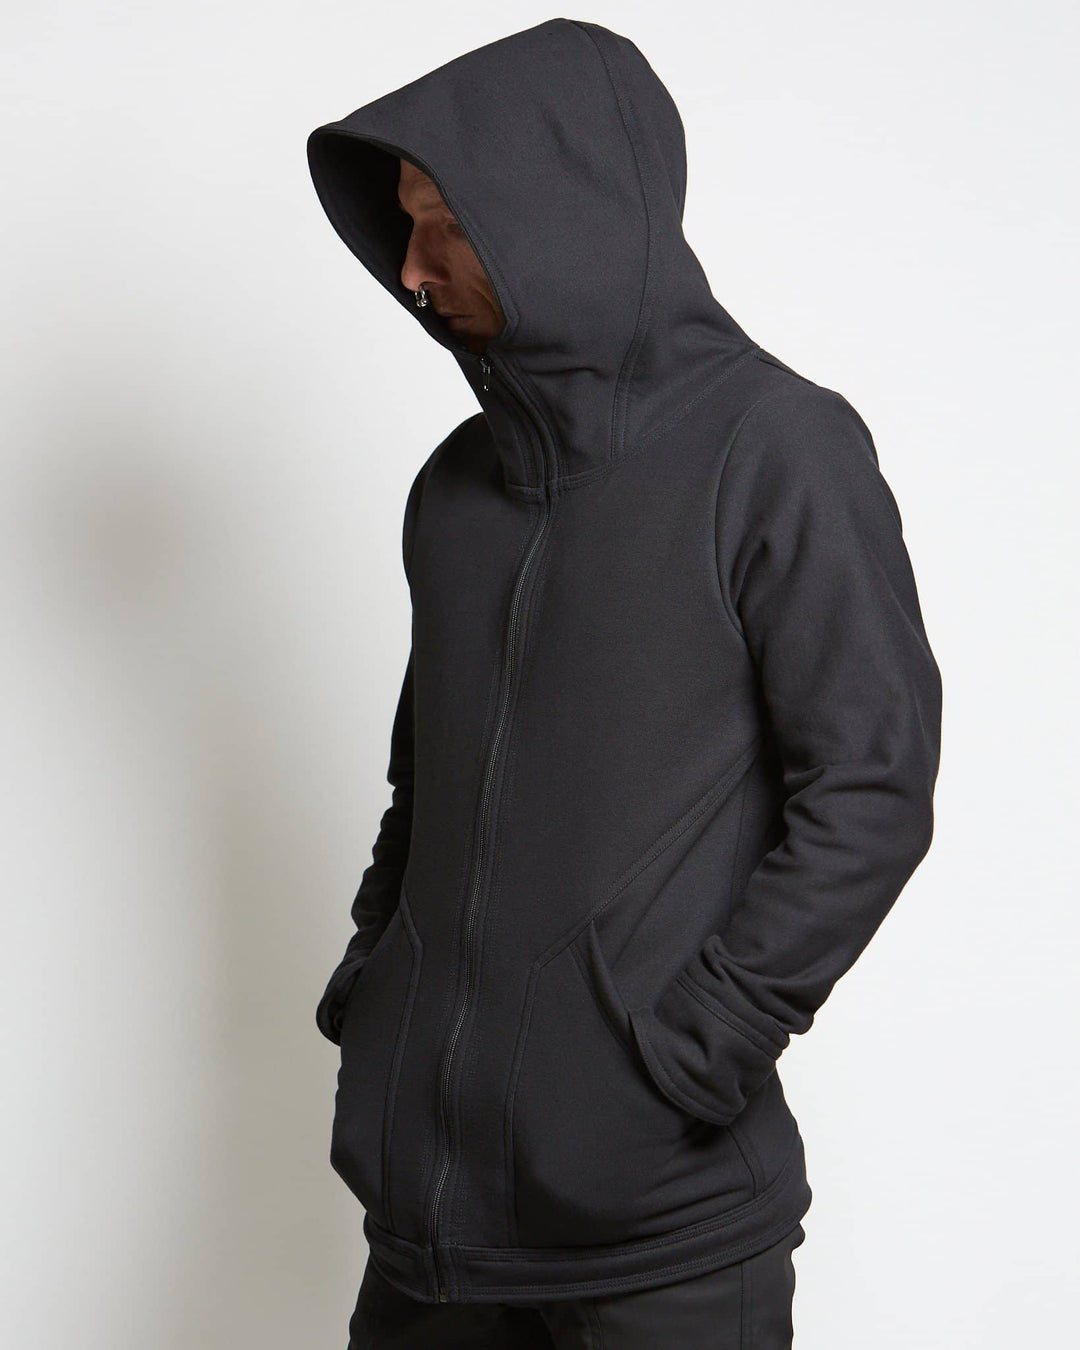 future fashion hoodie made from 100% cotton